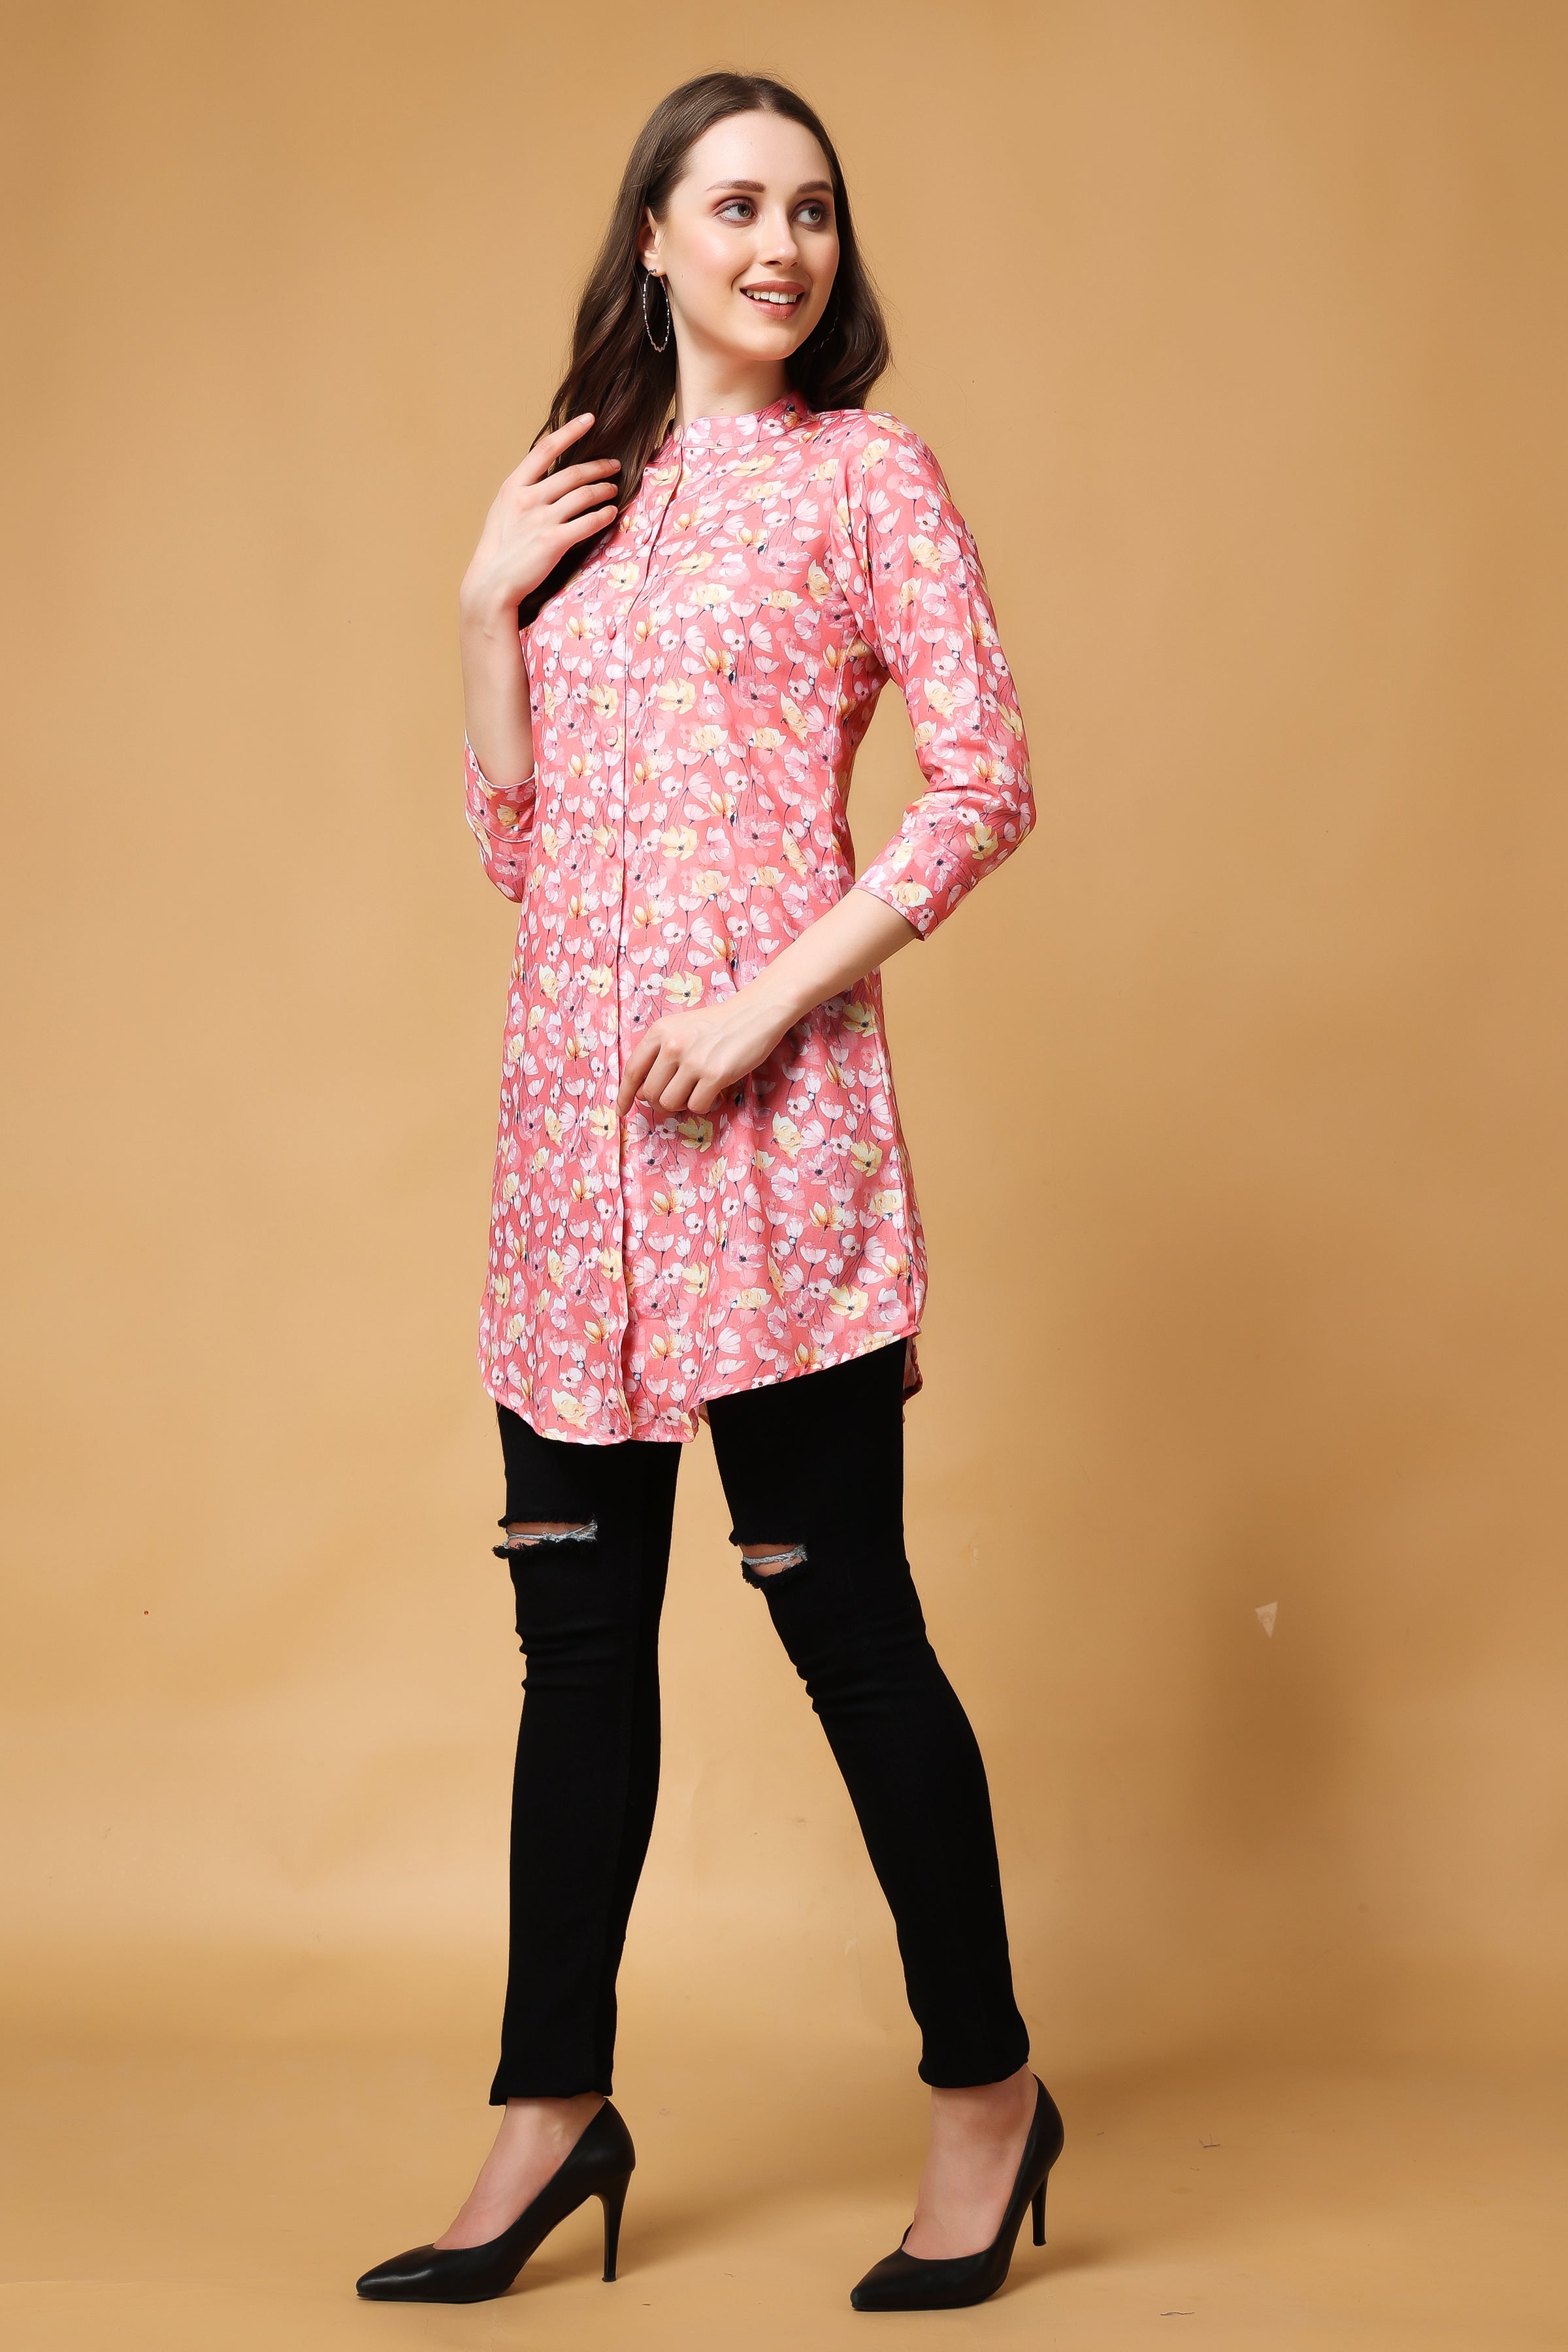 Ultimate Styling Tips To Look Gorgeous In Ethnic Kurtis by Ahika - Issuu